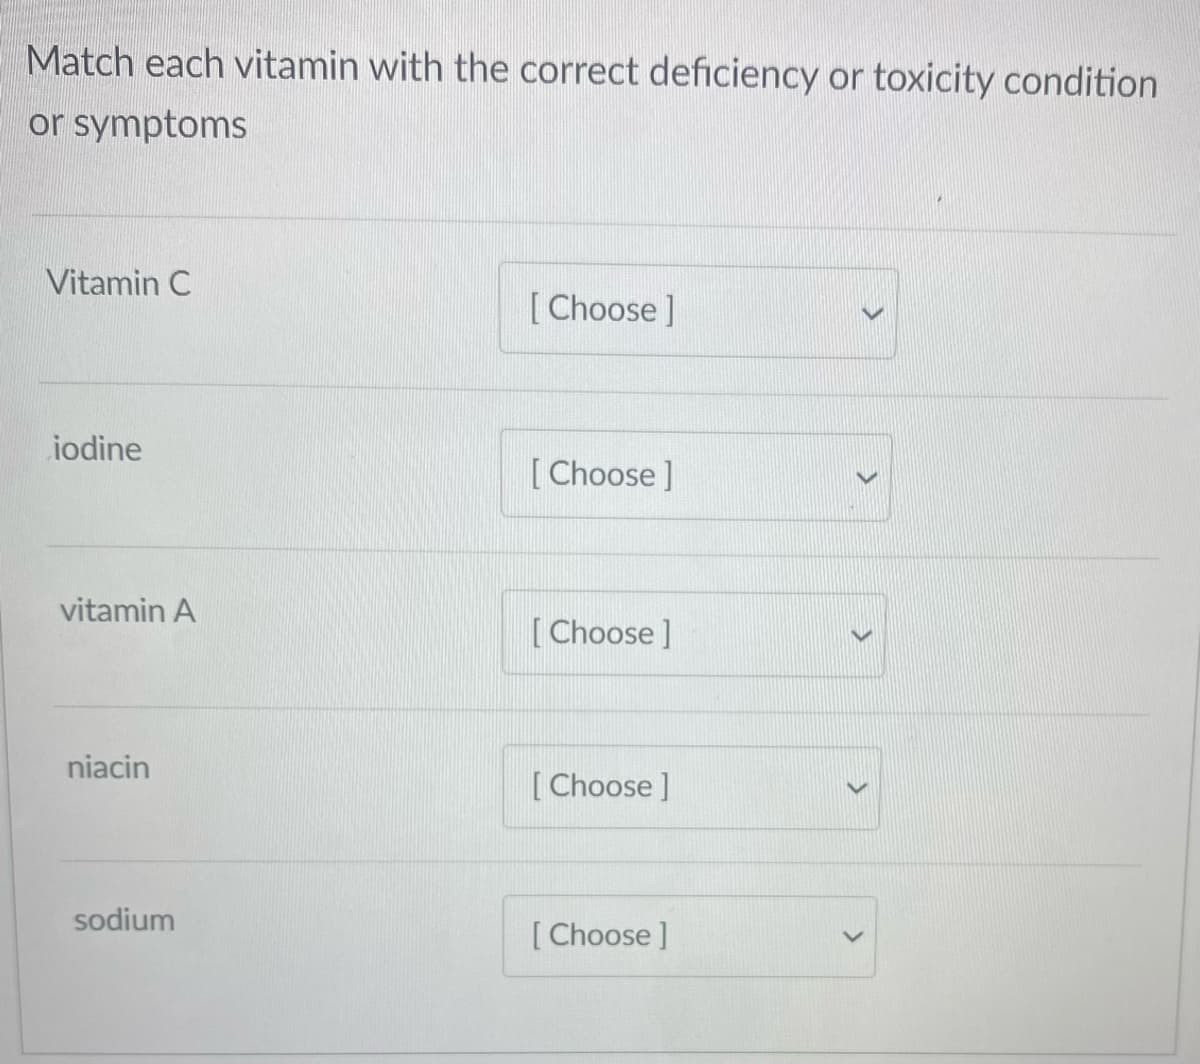 Match each vitamin with the correct deficiency or toxicity condition
or symptoms
Vitamin C
[Choose ]
iodine
[Choose ]
vitamin A
[Choose ]
niacin
[ Choose ]
sodium
[ Choose ]
